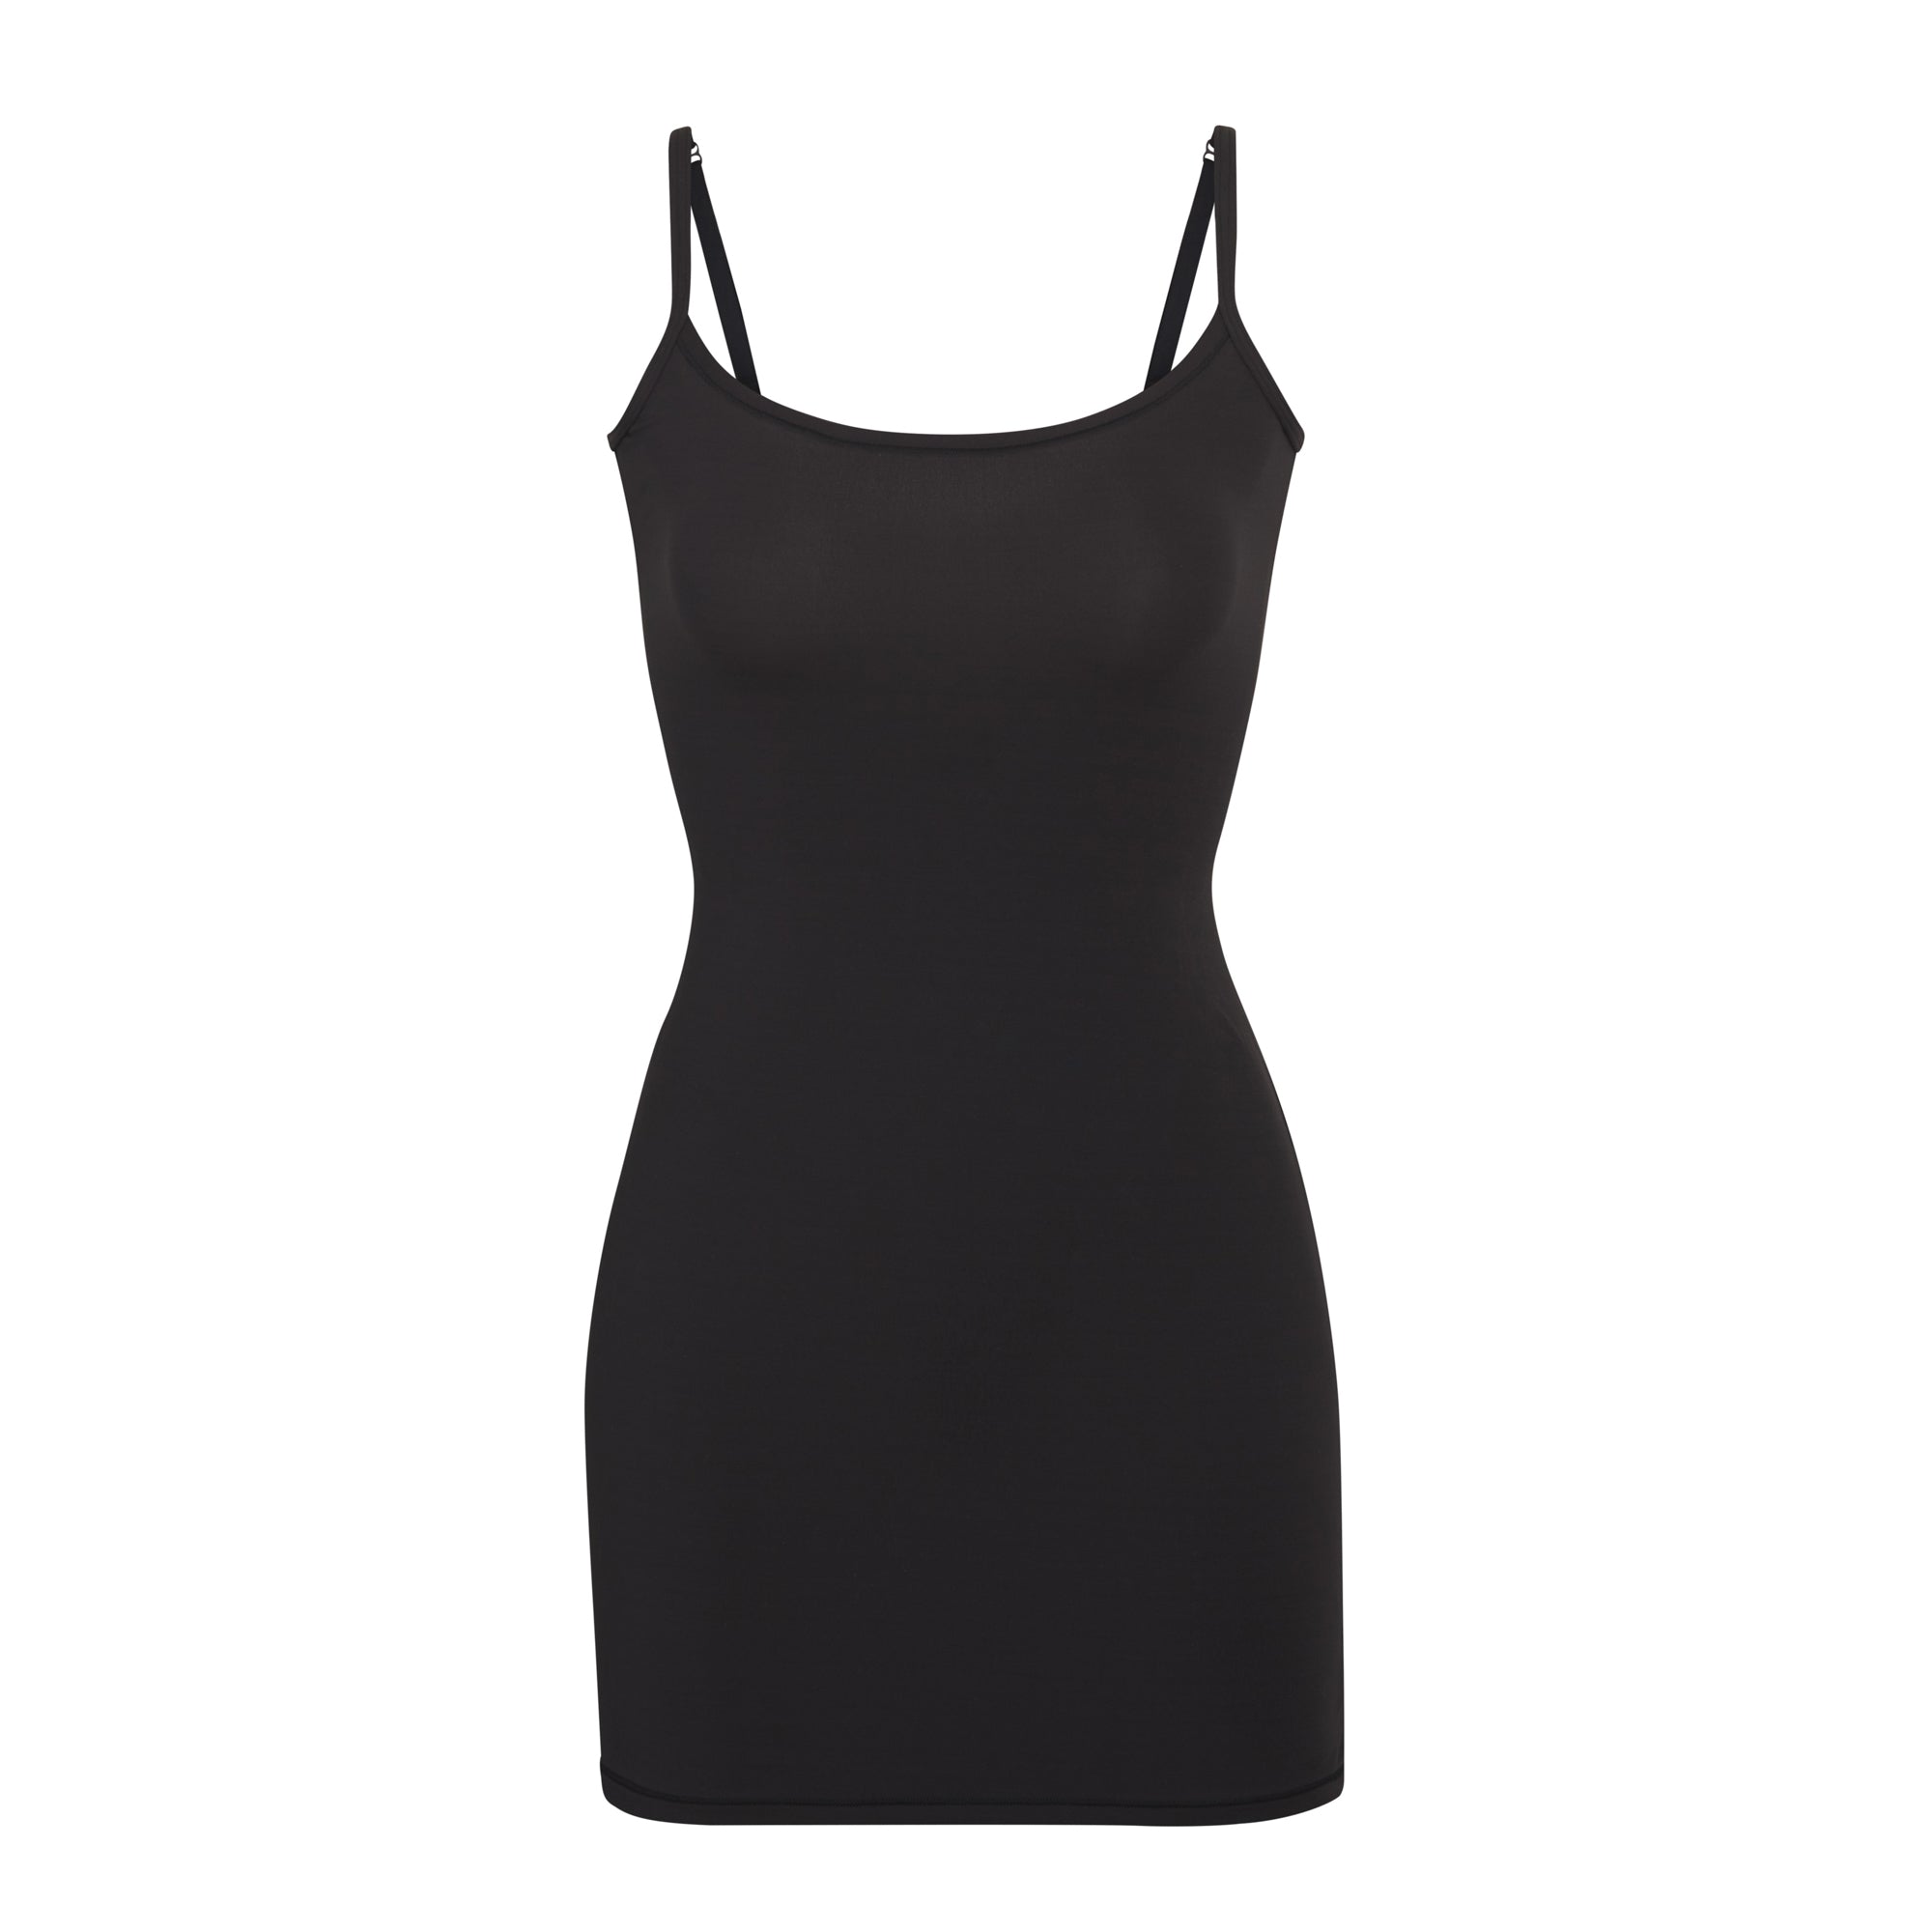 Skims dresses….I will be ordering every single color in the long one. , Skims Shapewear